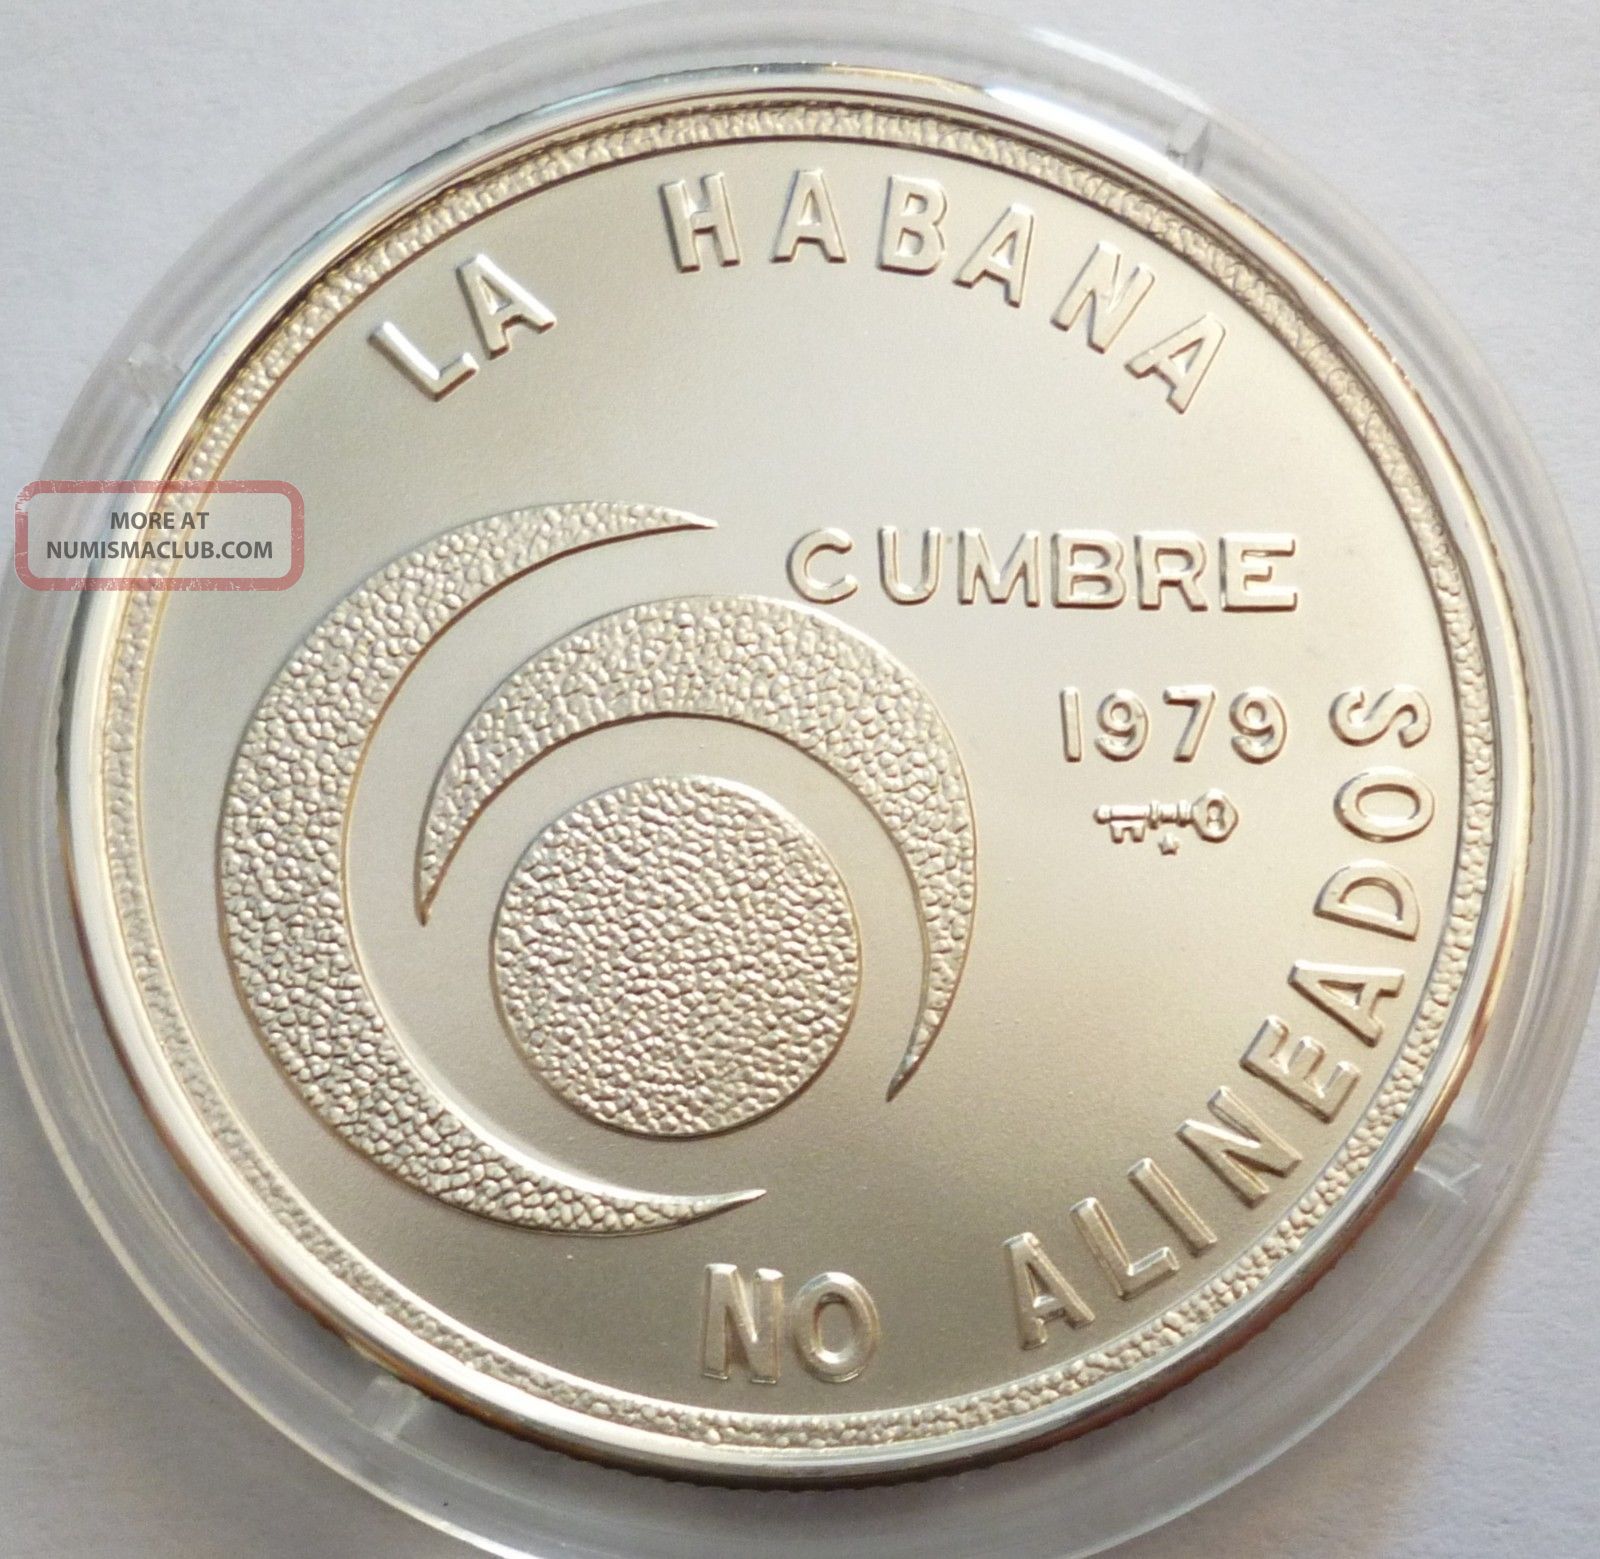 Havana 20 Pesos 1979 Nations Conference Silver Coin Unc Coins: World photo